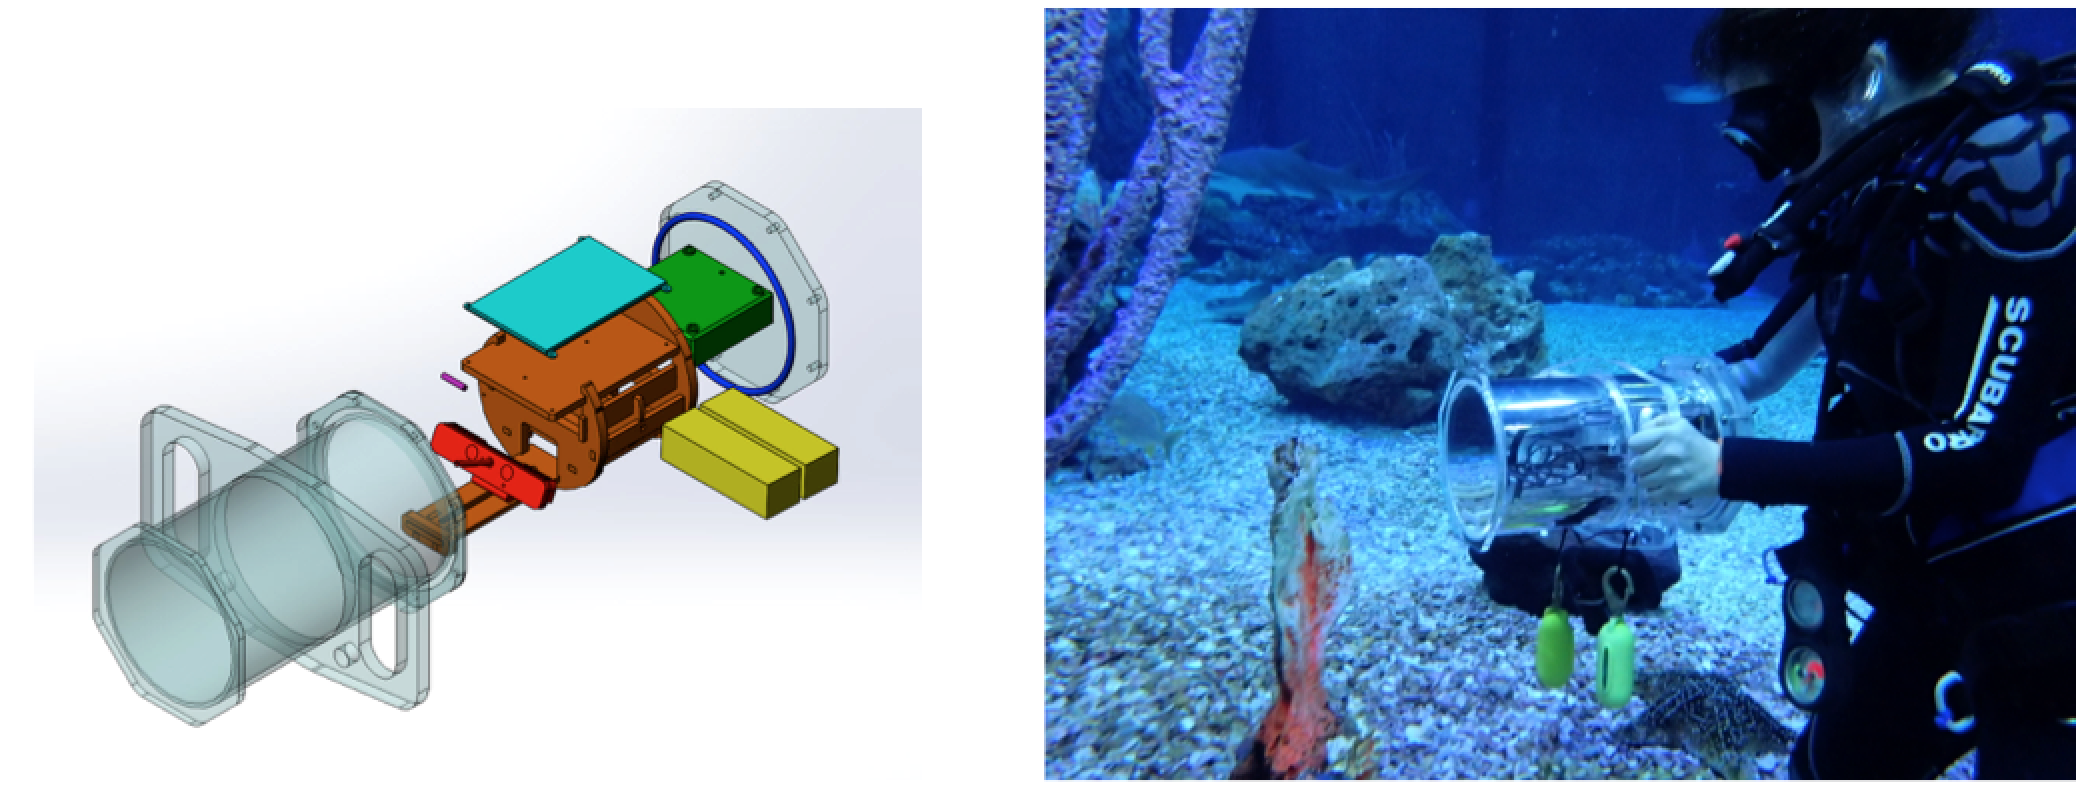 Underwater 3D Capture using a Low-Cost Commercial Depth Camera-Image